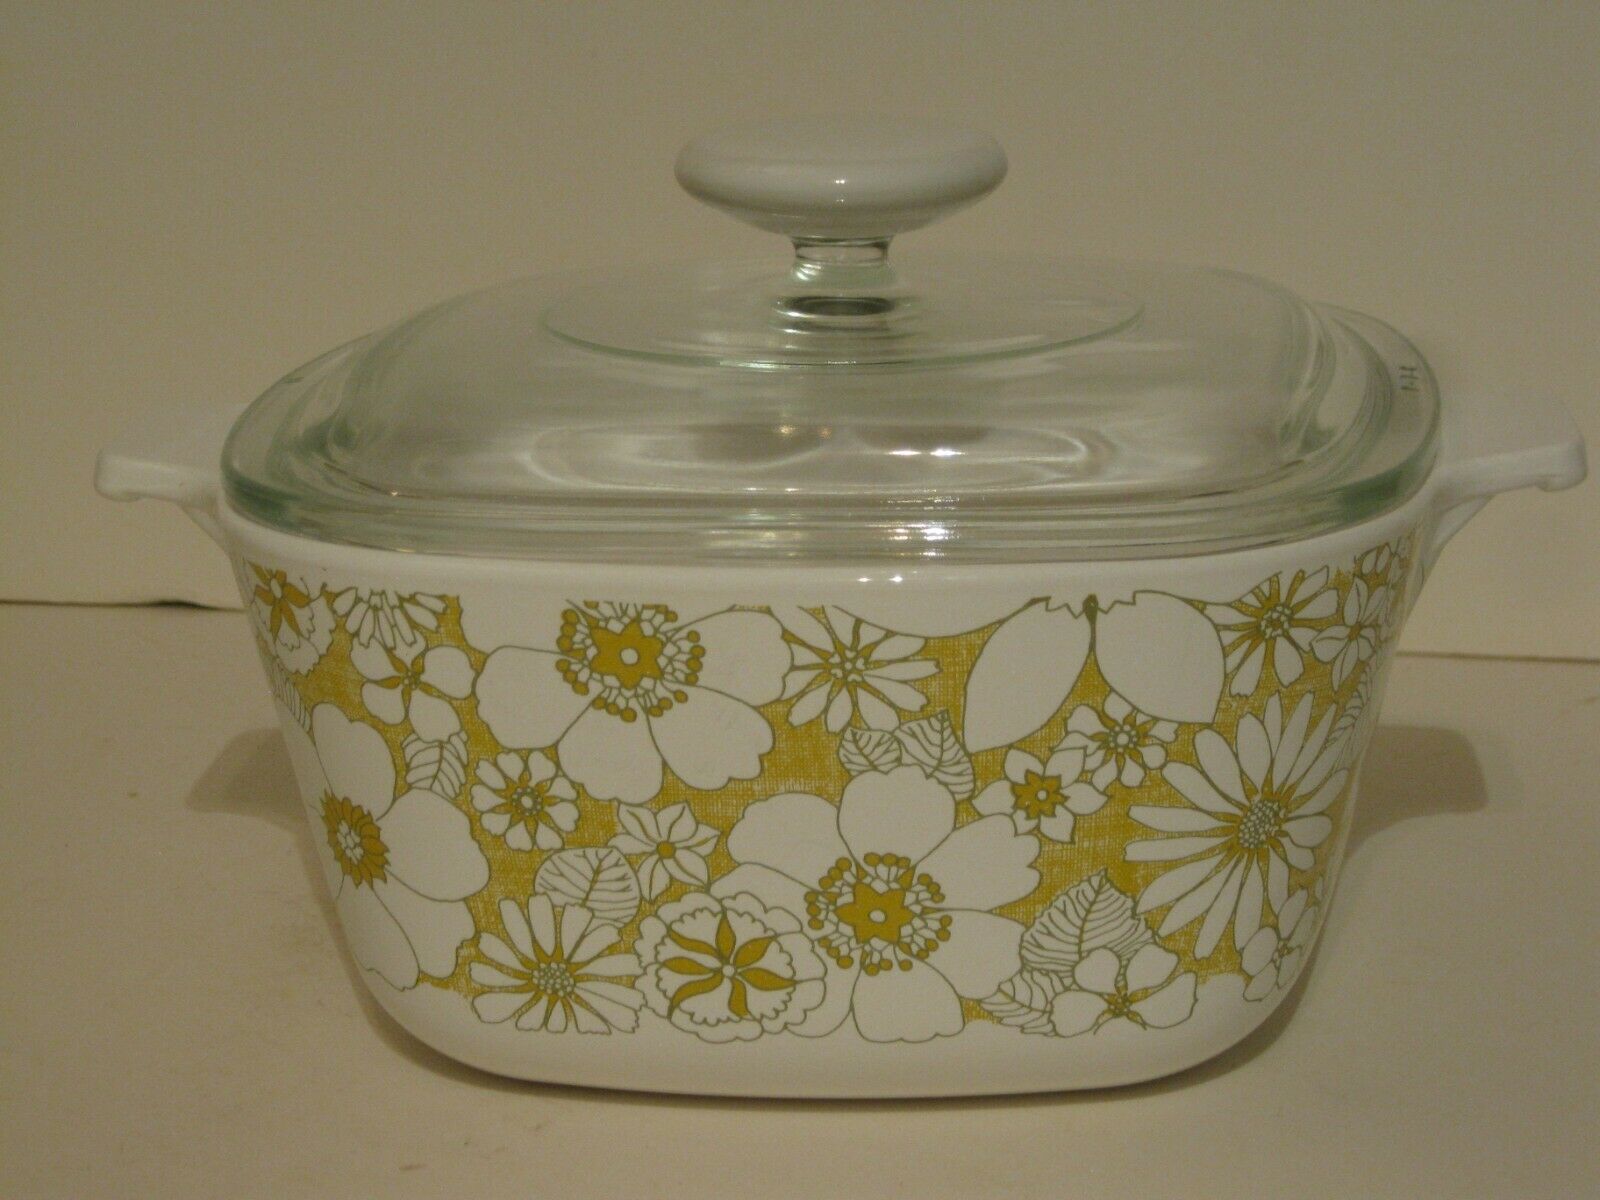 Vintage Corning Ware 1 3/4 Quart Baking Dish With Lid - Gold Flowers